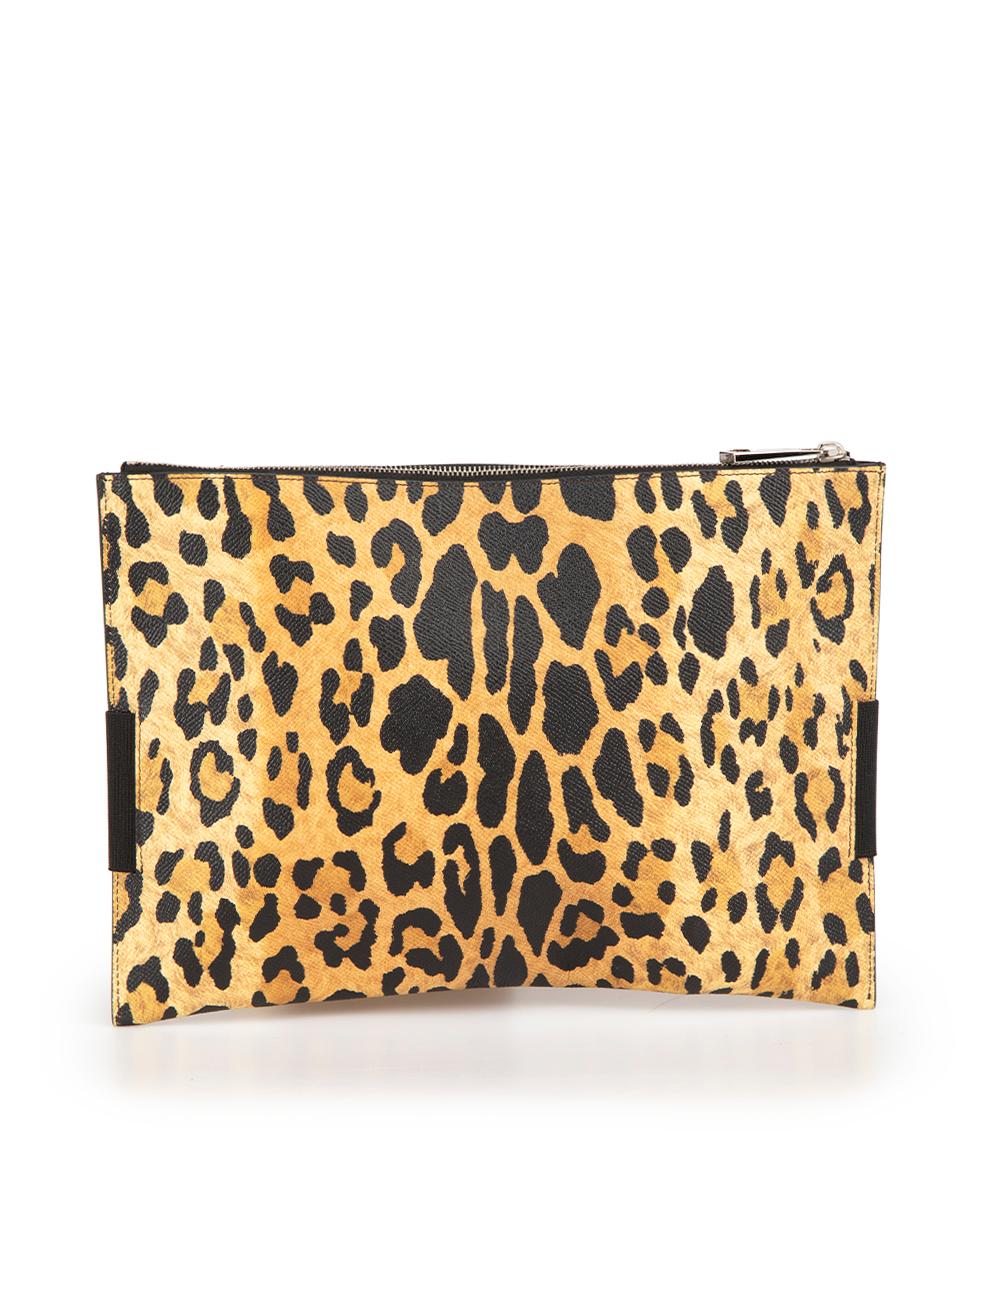 Givenchy Brown Leopard Print Leather Clutch In Excellent Condition For Sale In London, GB